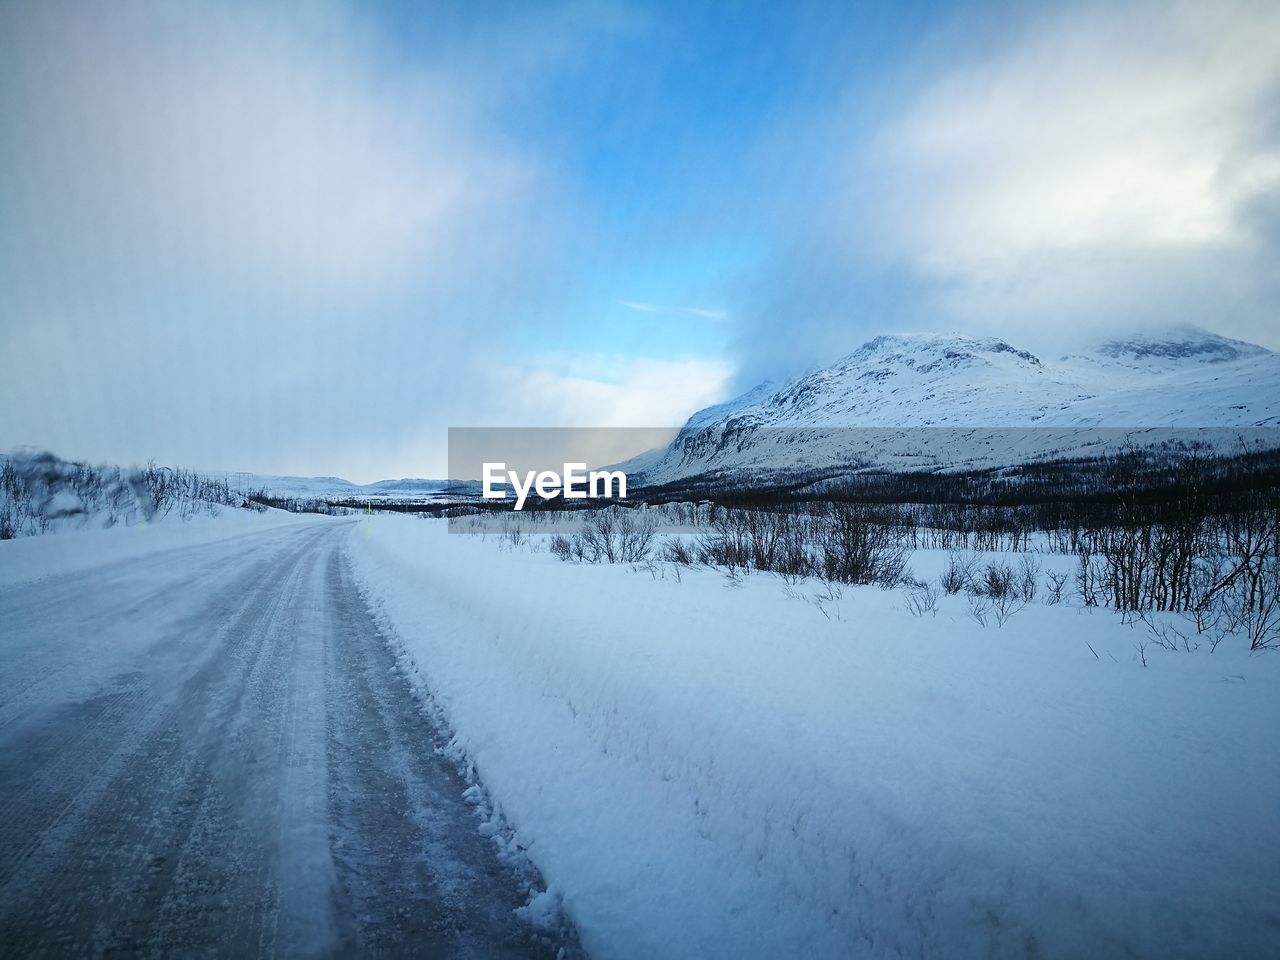 Driving in lappland 